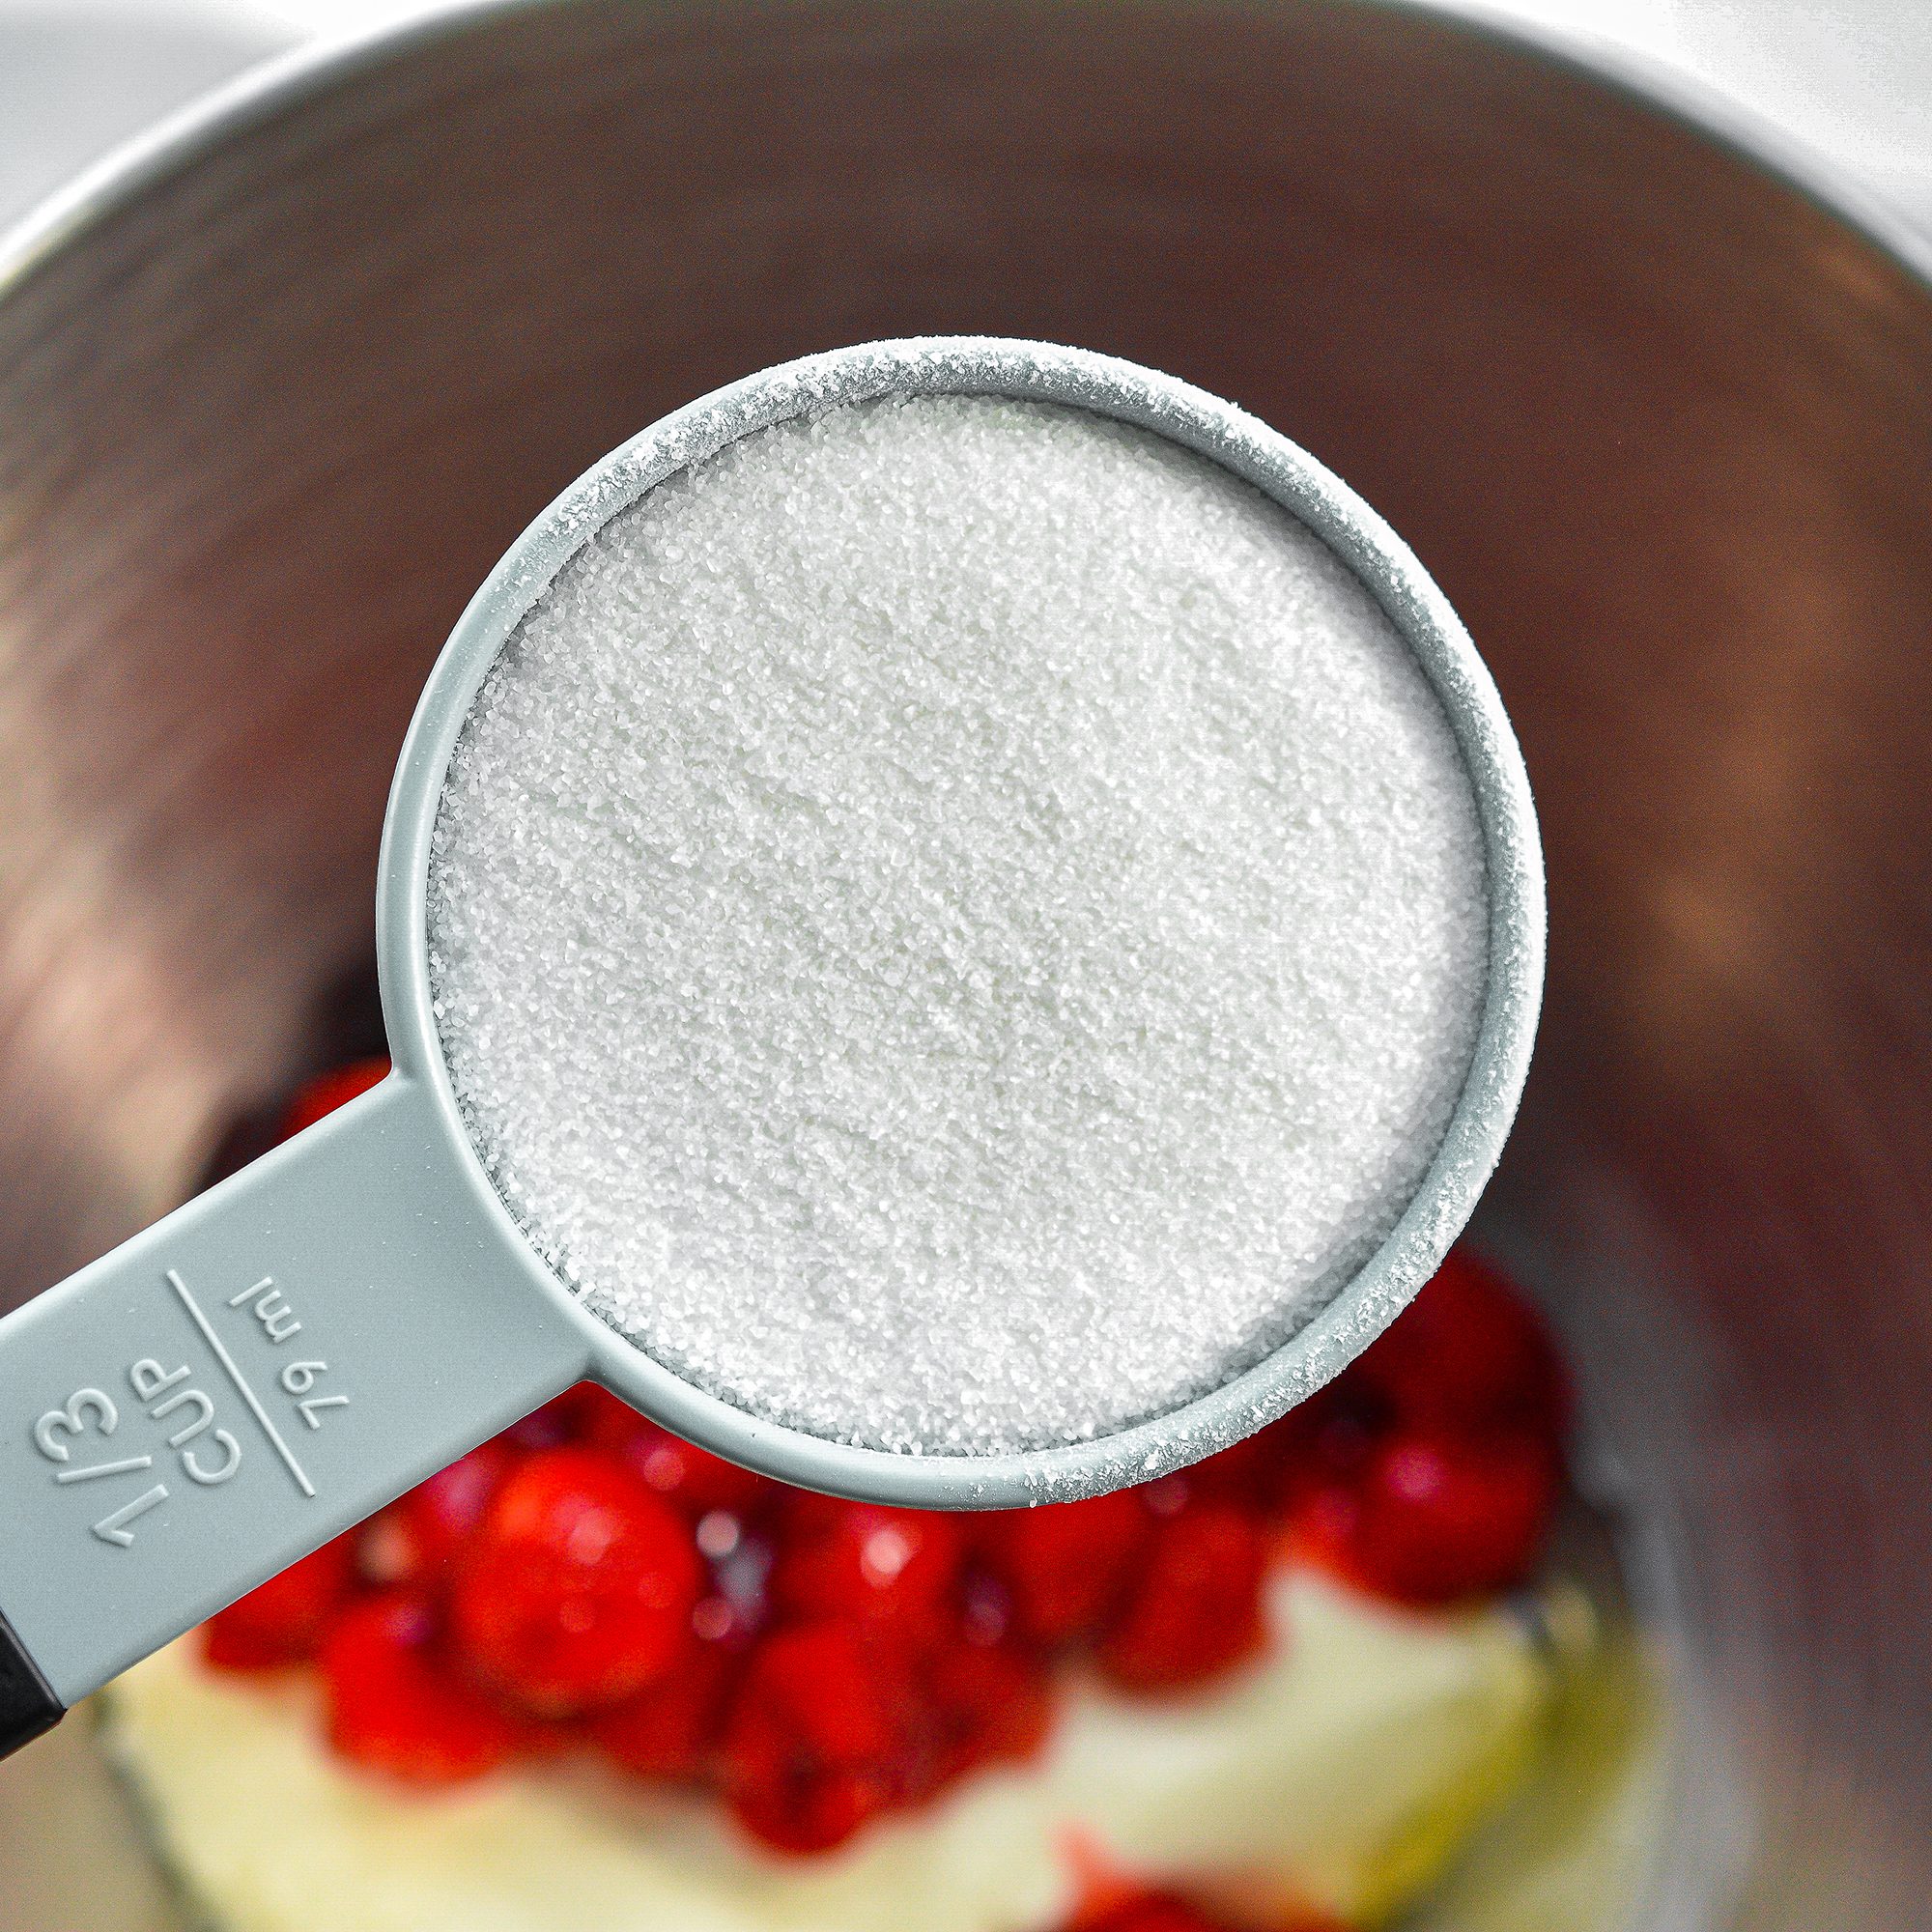 In a mixing bowl, combine the cream cheese, ⅓ cup sugar, 